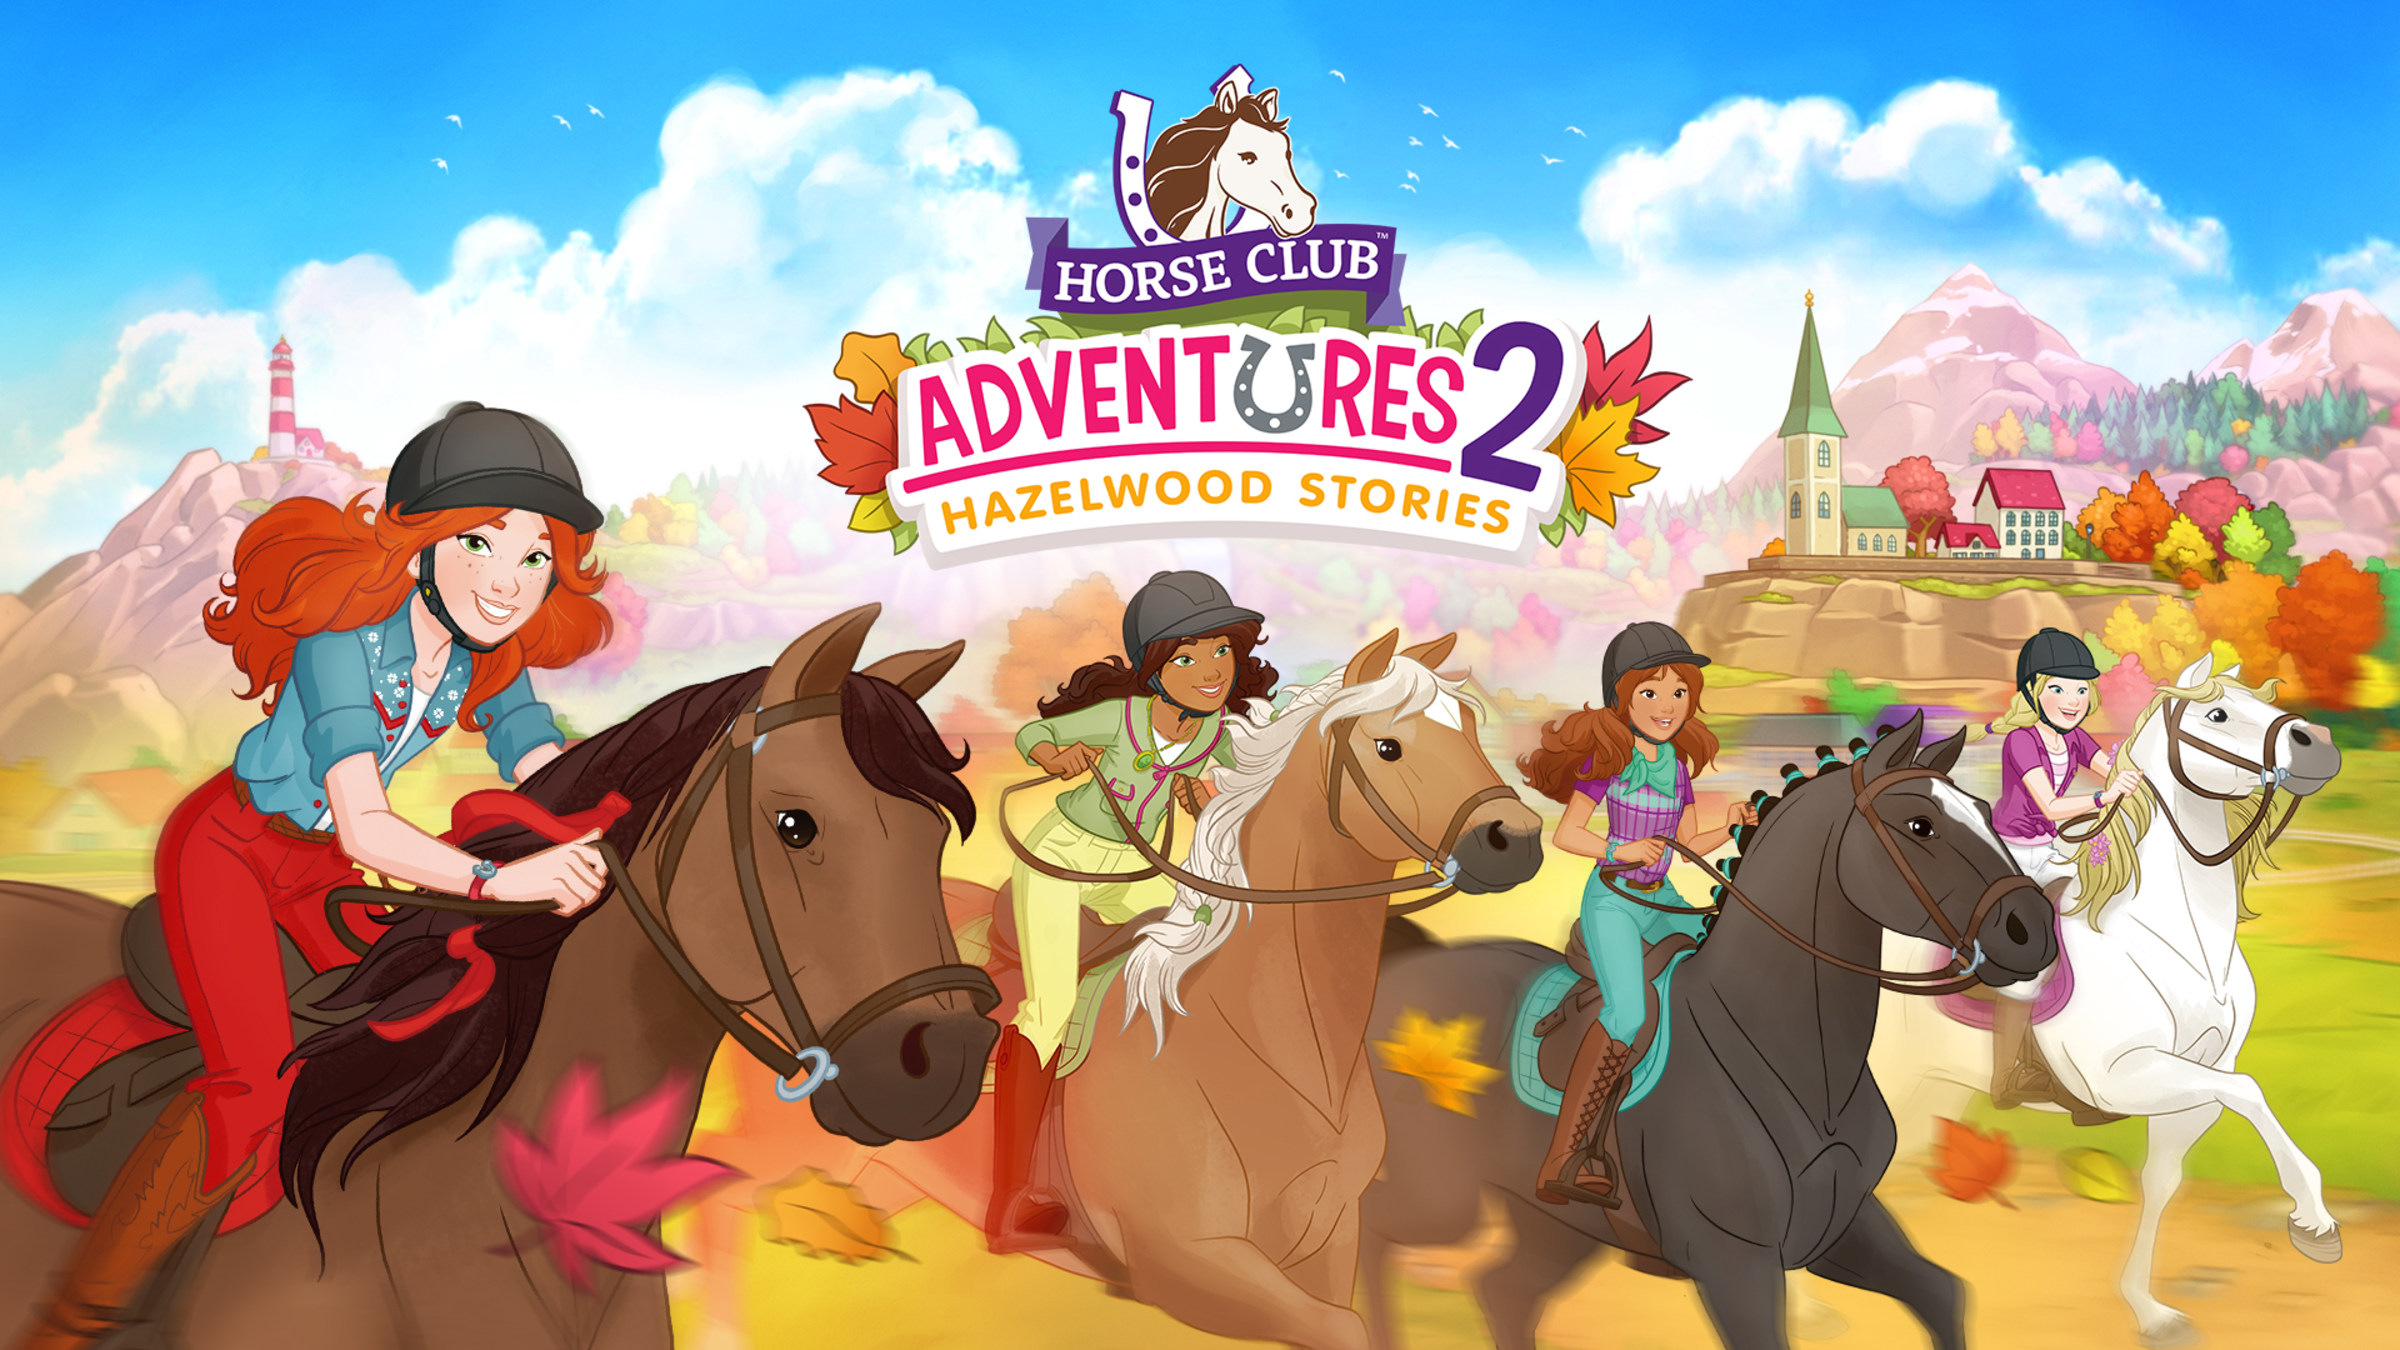 Club™ Nintendo Stories Official Nintendo Site Hazelwood Switch Adventures 2: for - Horse